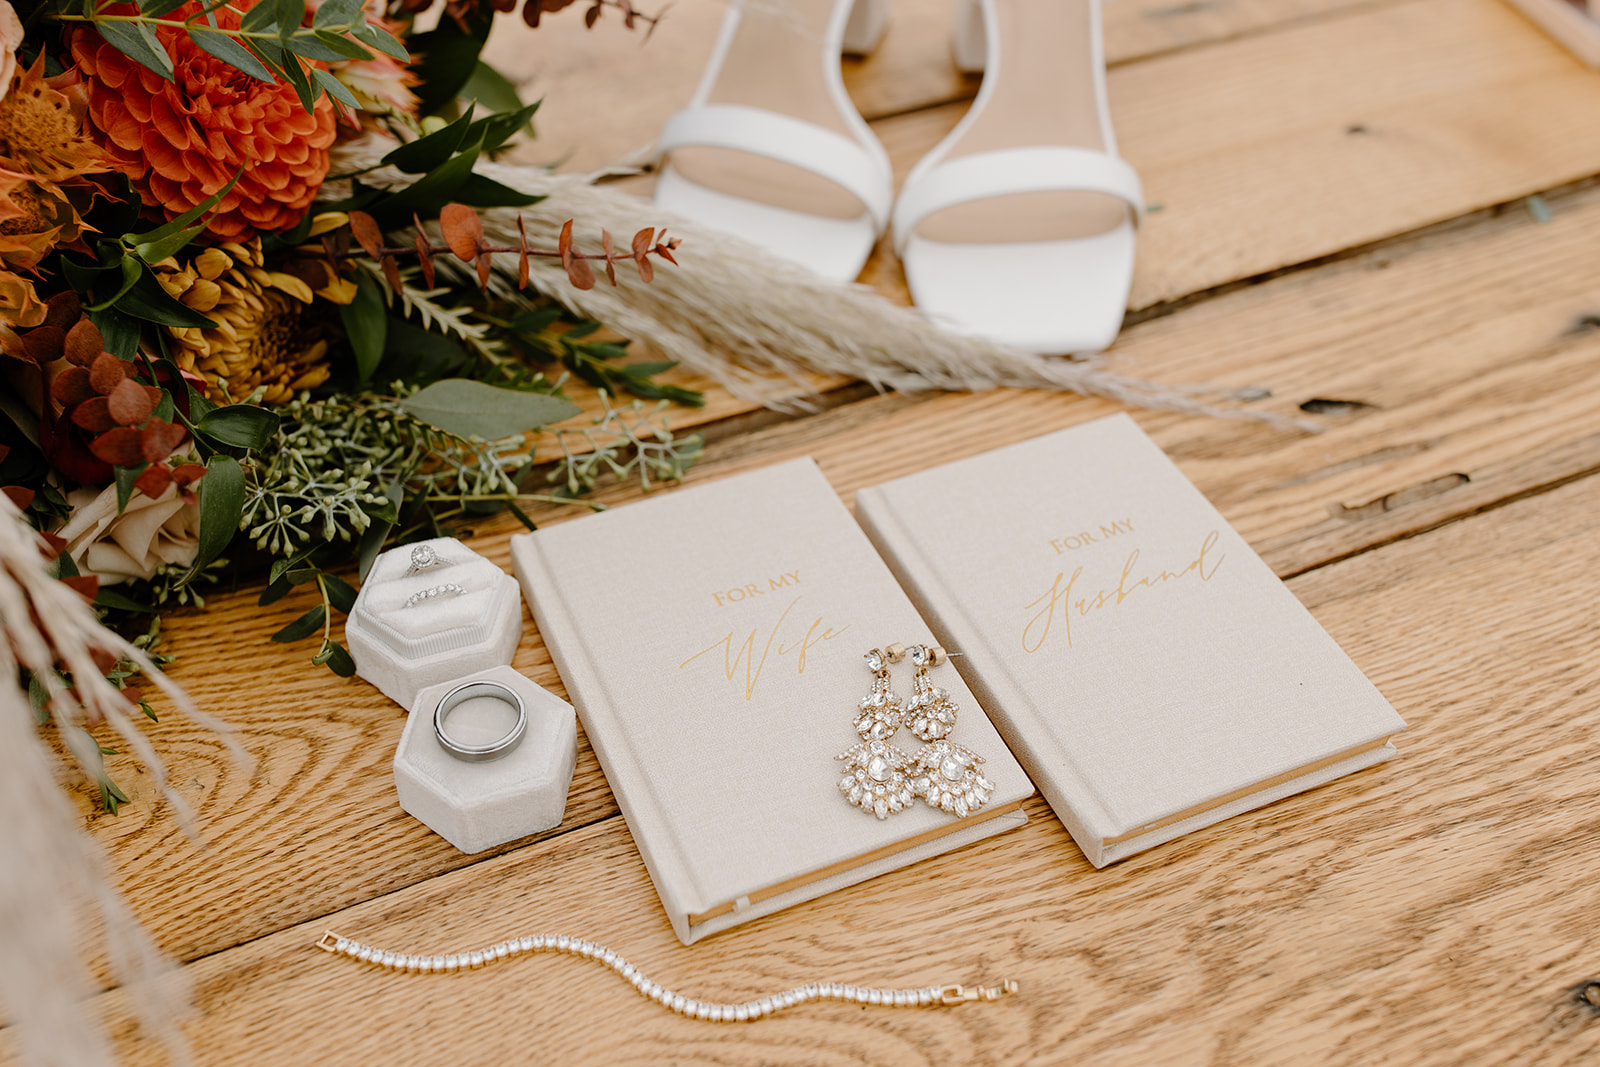 Vow books with wedding rings